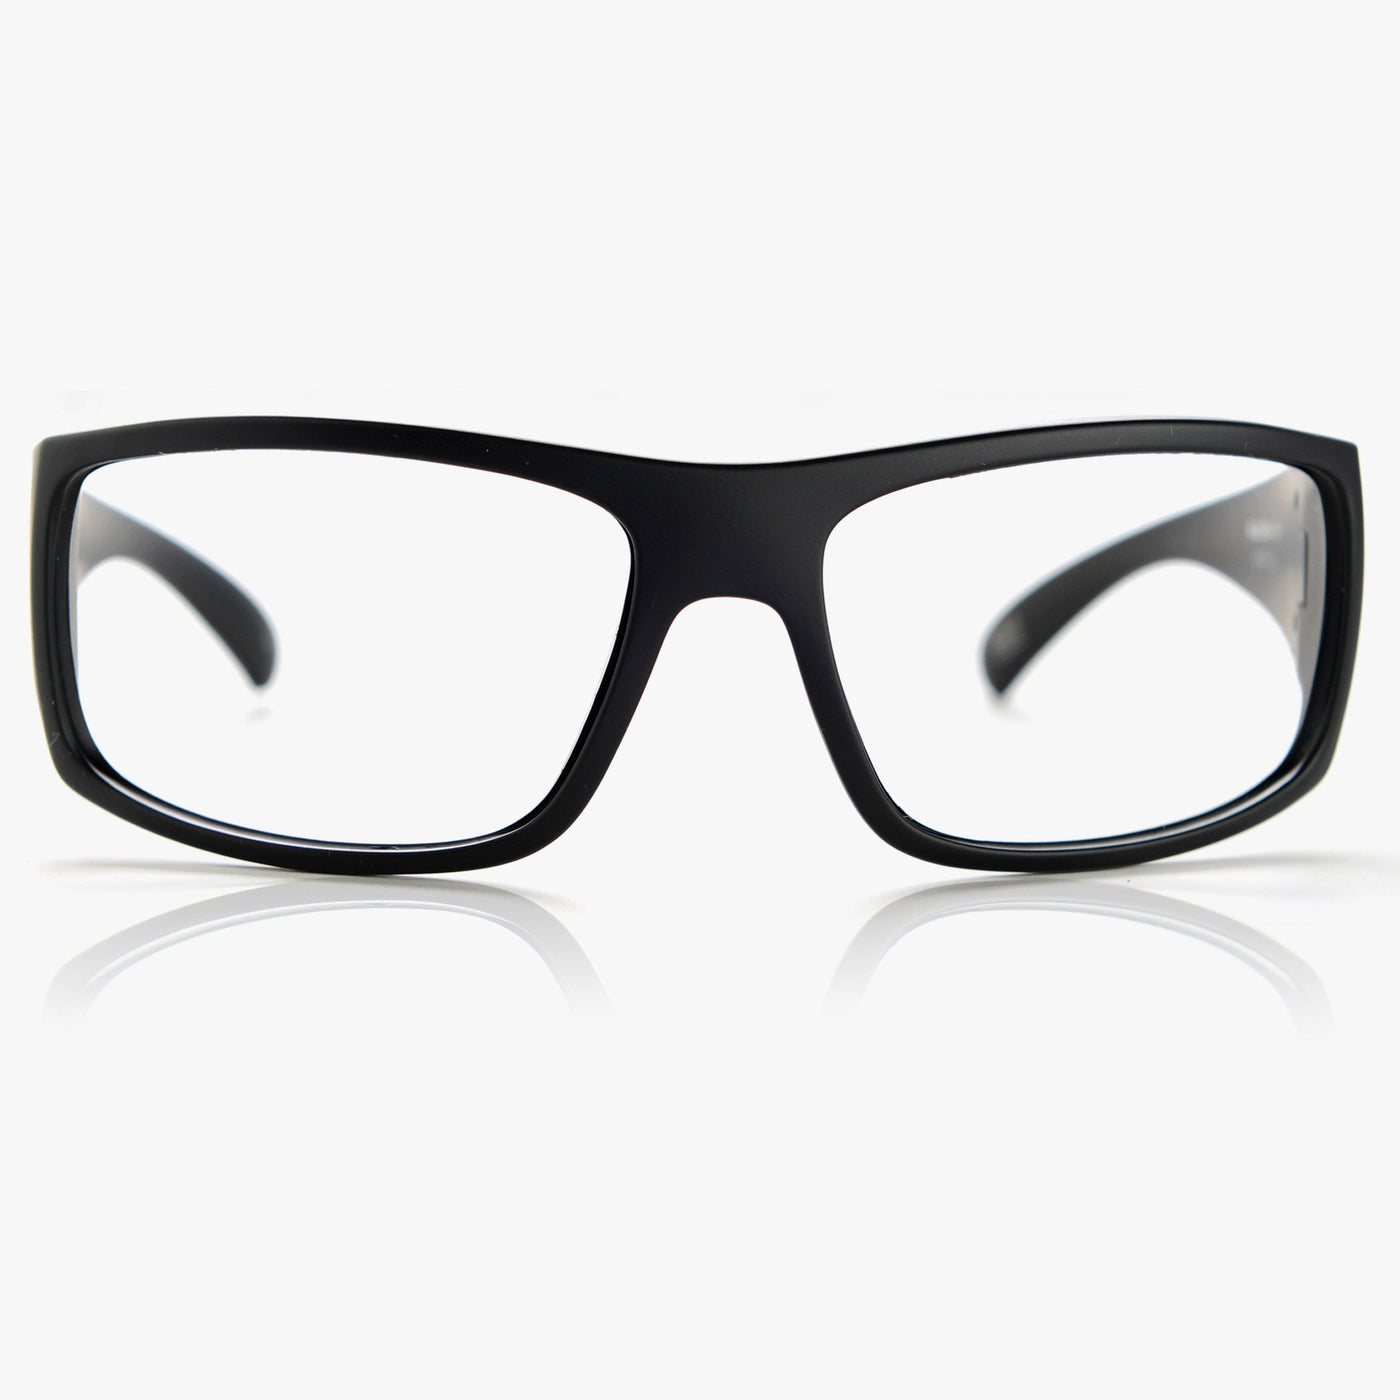 black sunglasses with clear lenses